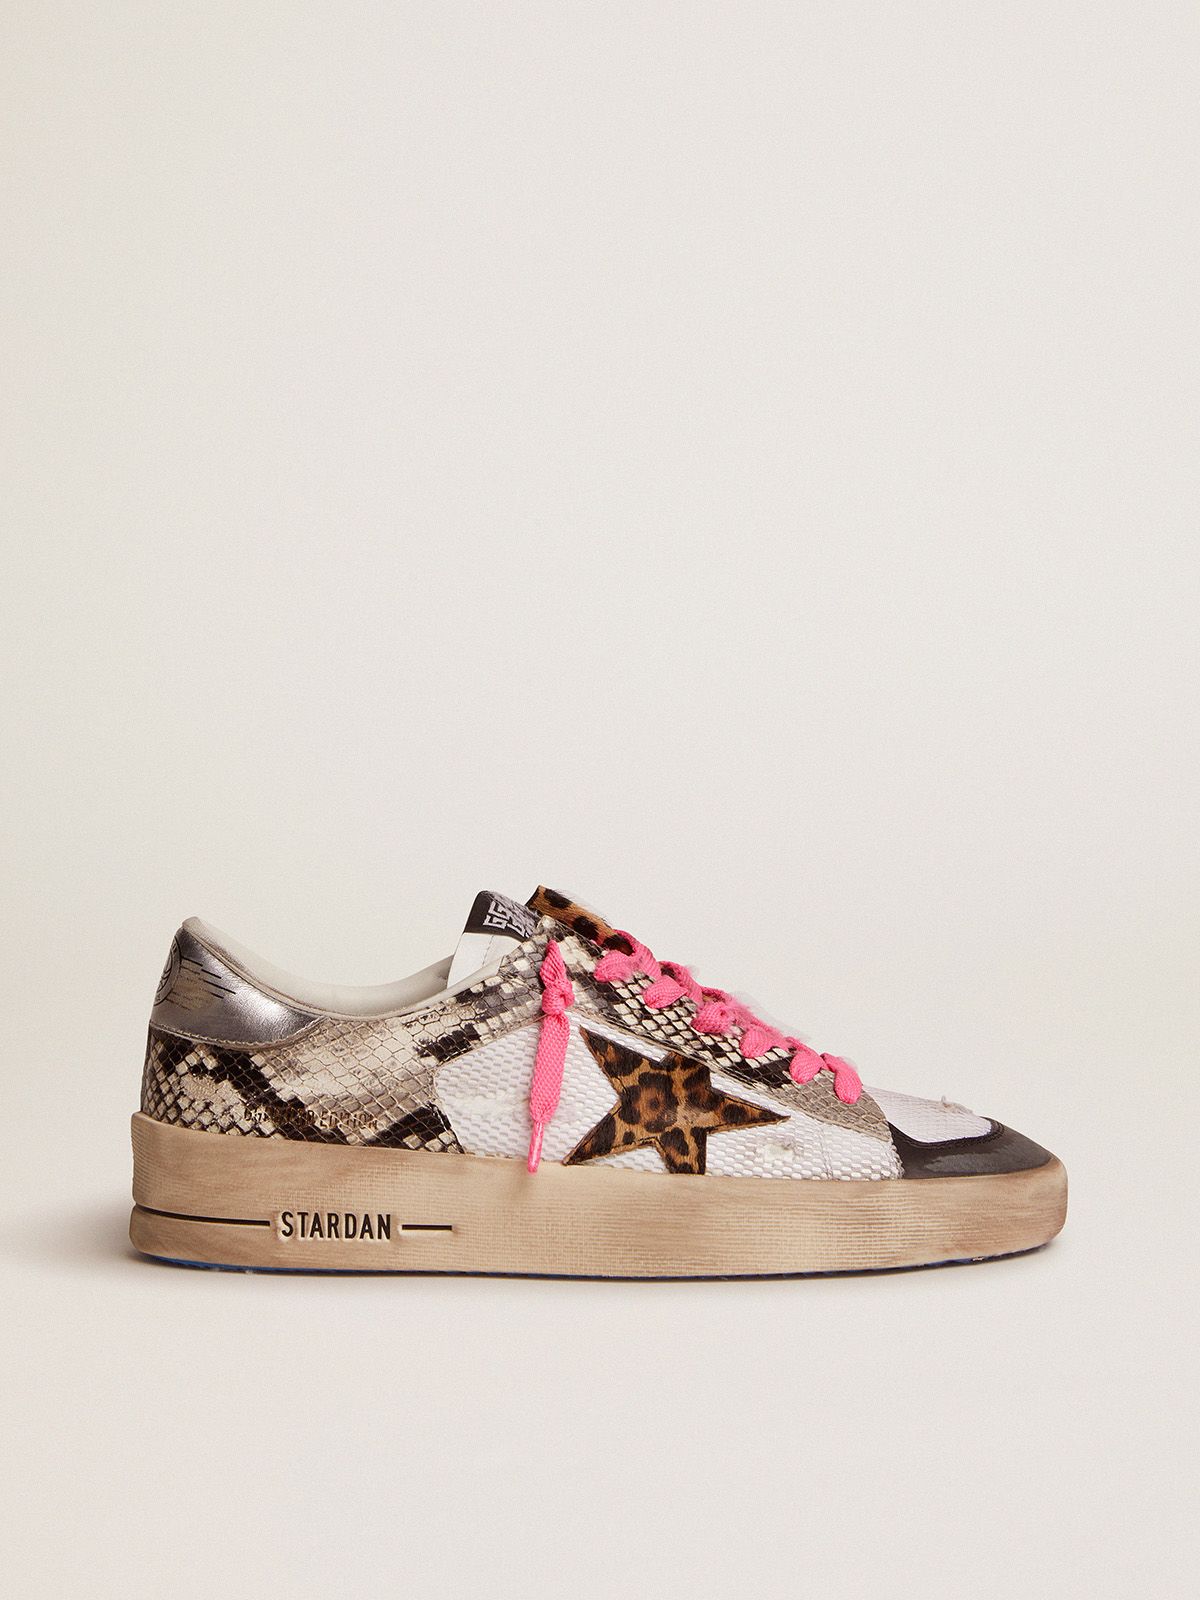 golden goose snake-print star LAB leather with and sneakers Stardan leopard-print upper skin pony